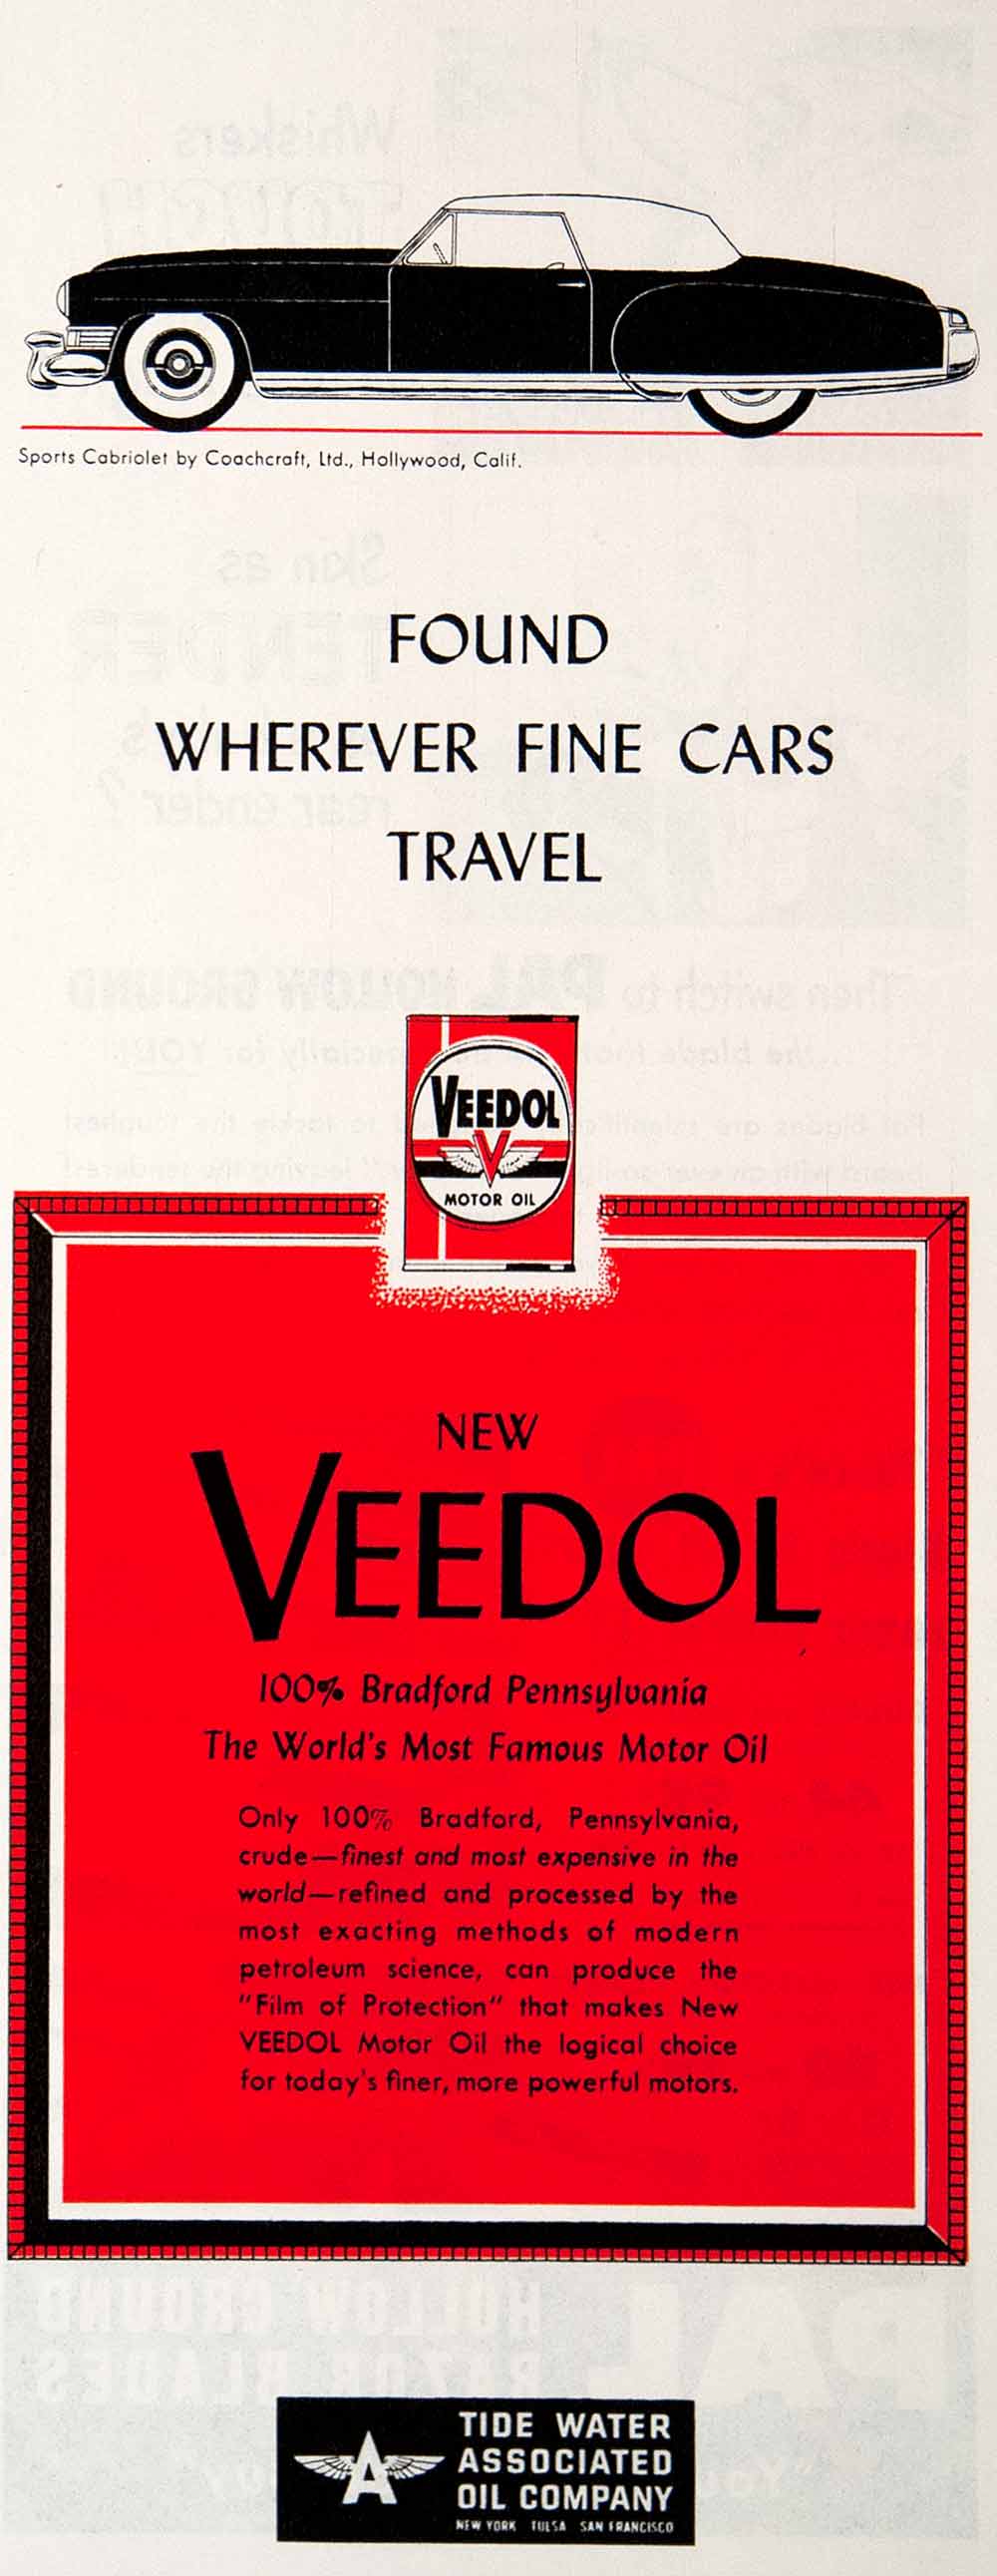 1950 Ad Veedol Motor Oil Tide Water Sport Cabriolet Coachcraft Limited COLL3